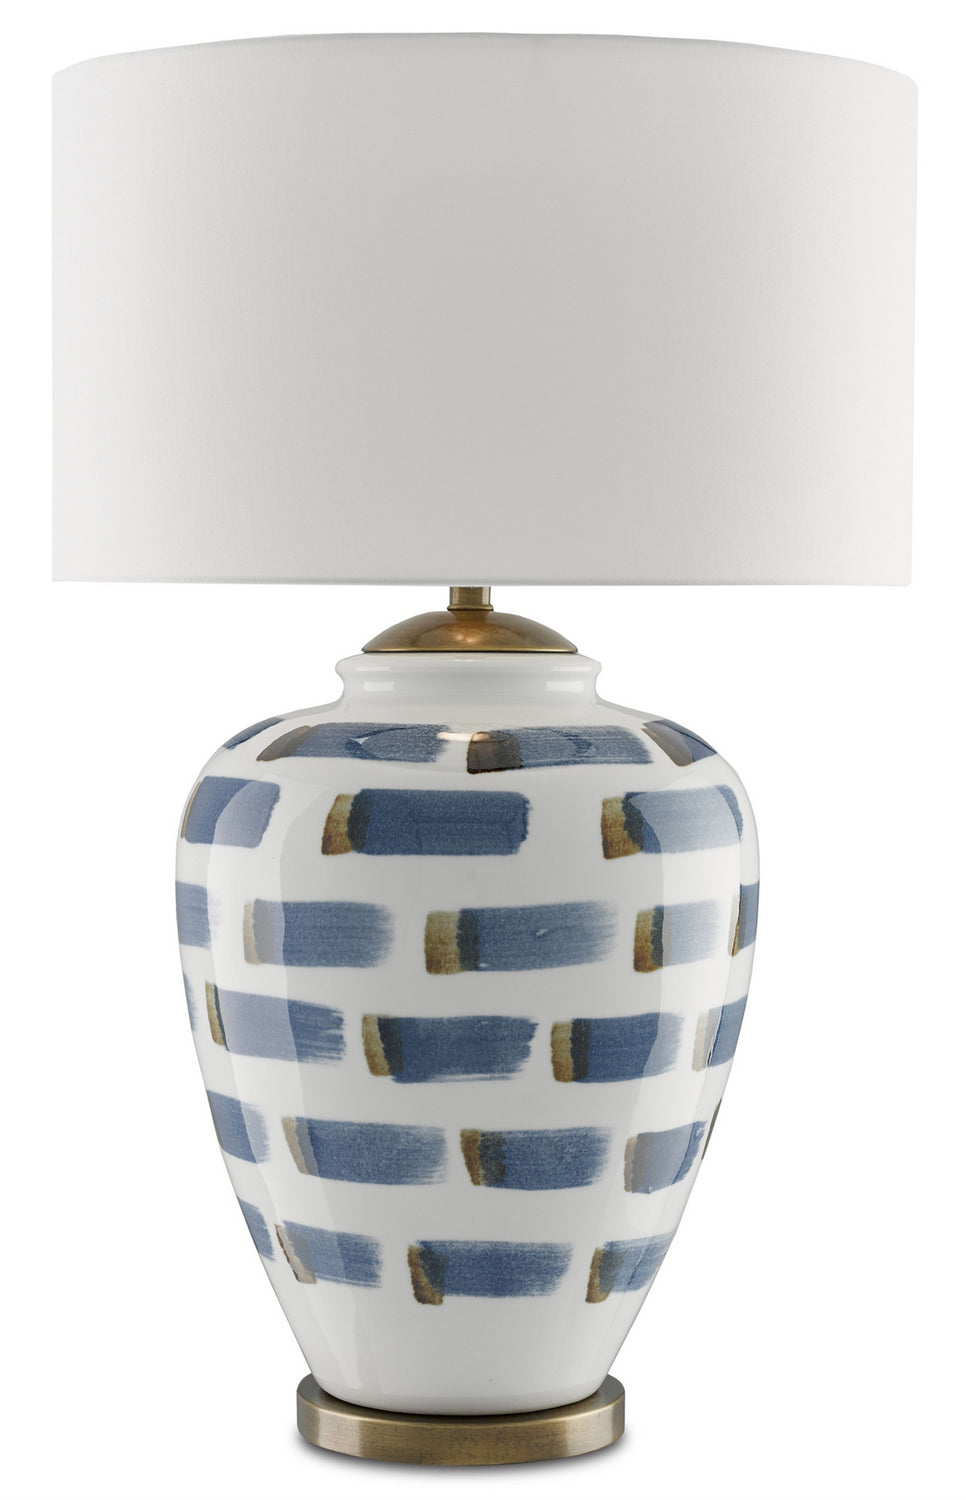 One Light Table Lamp from the Brushstroke collection in White/Blue/Antique Brass finish